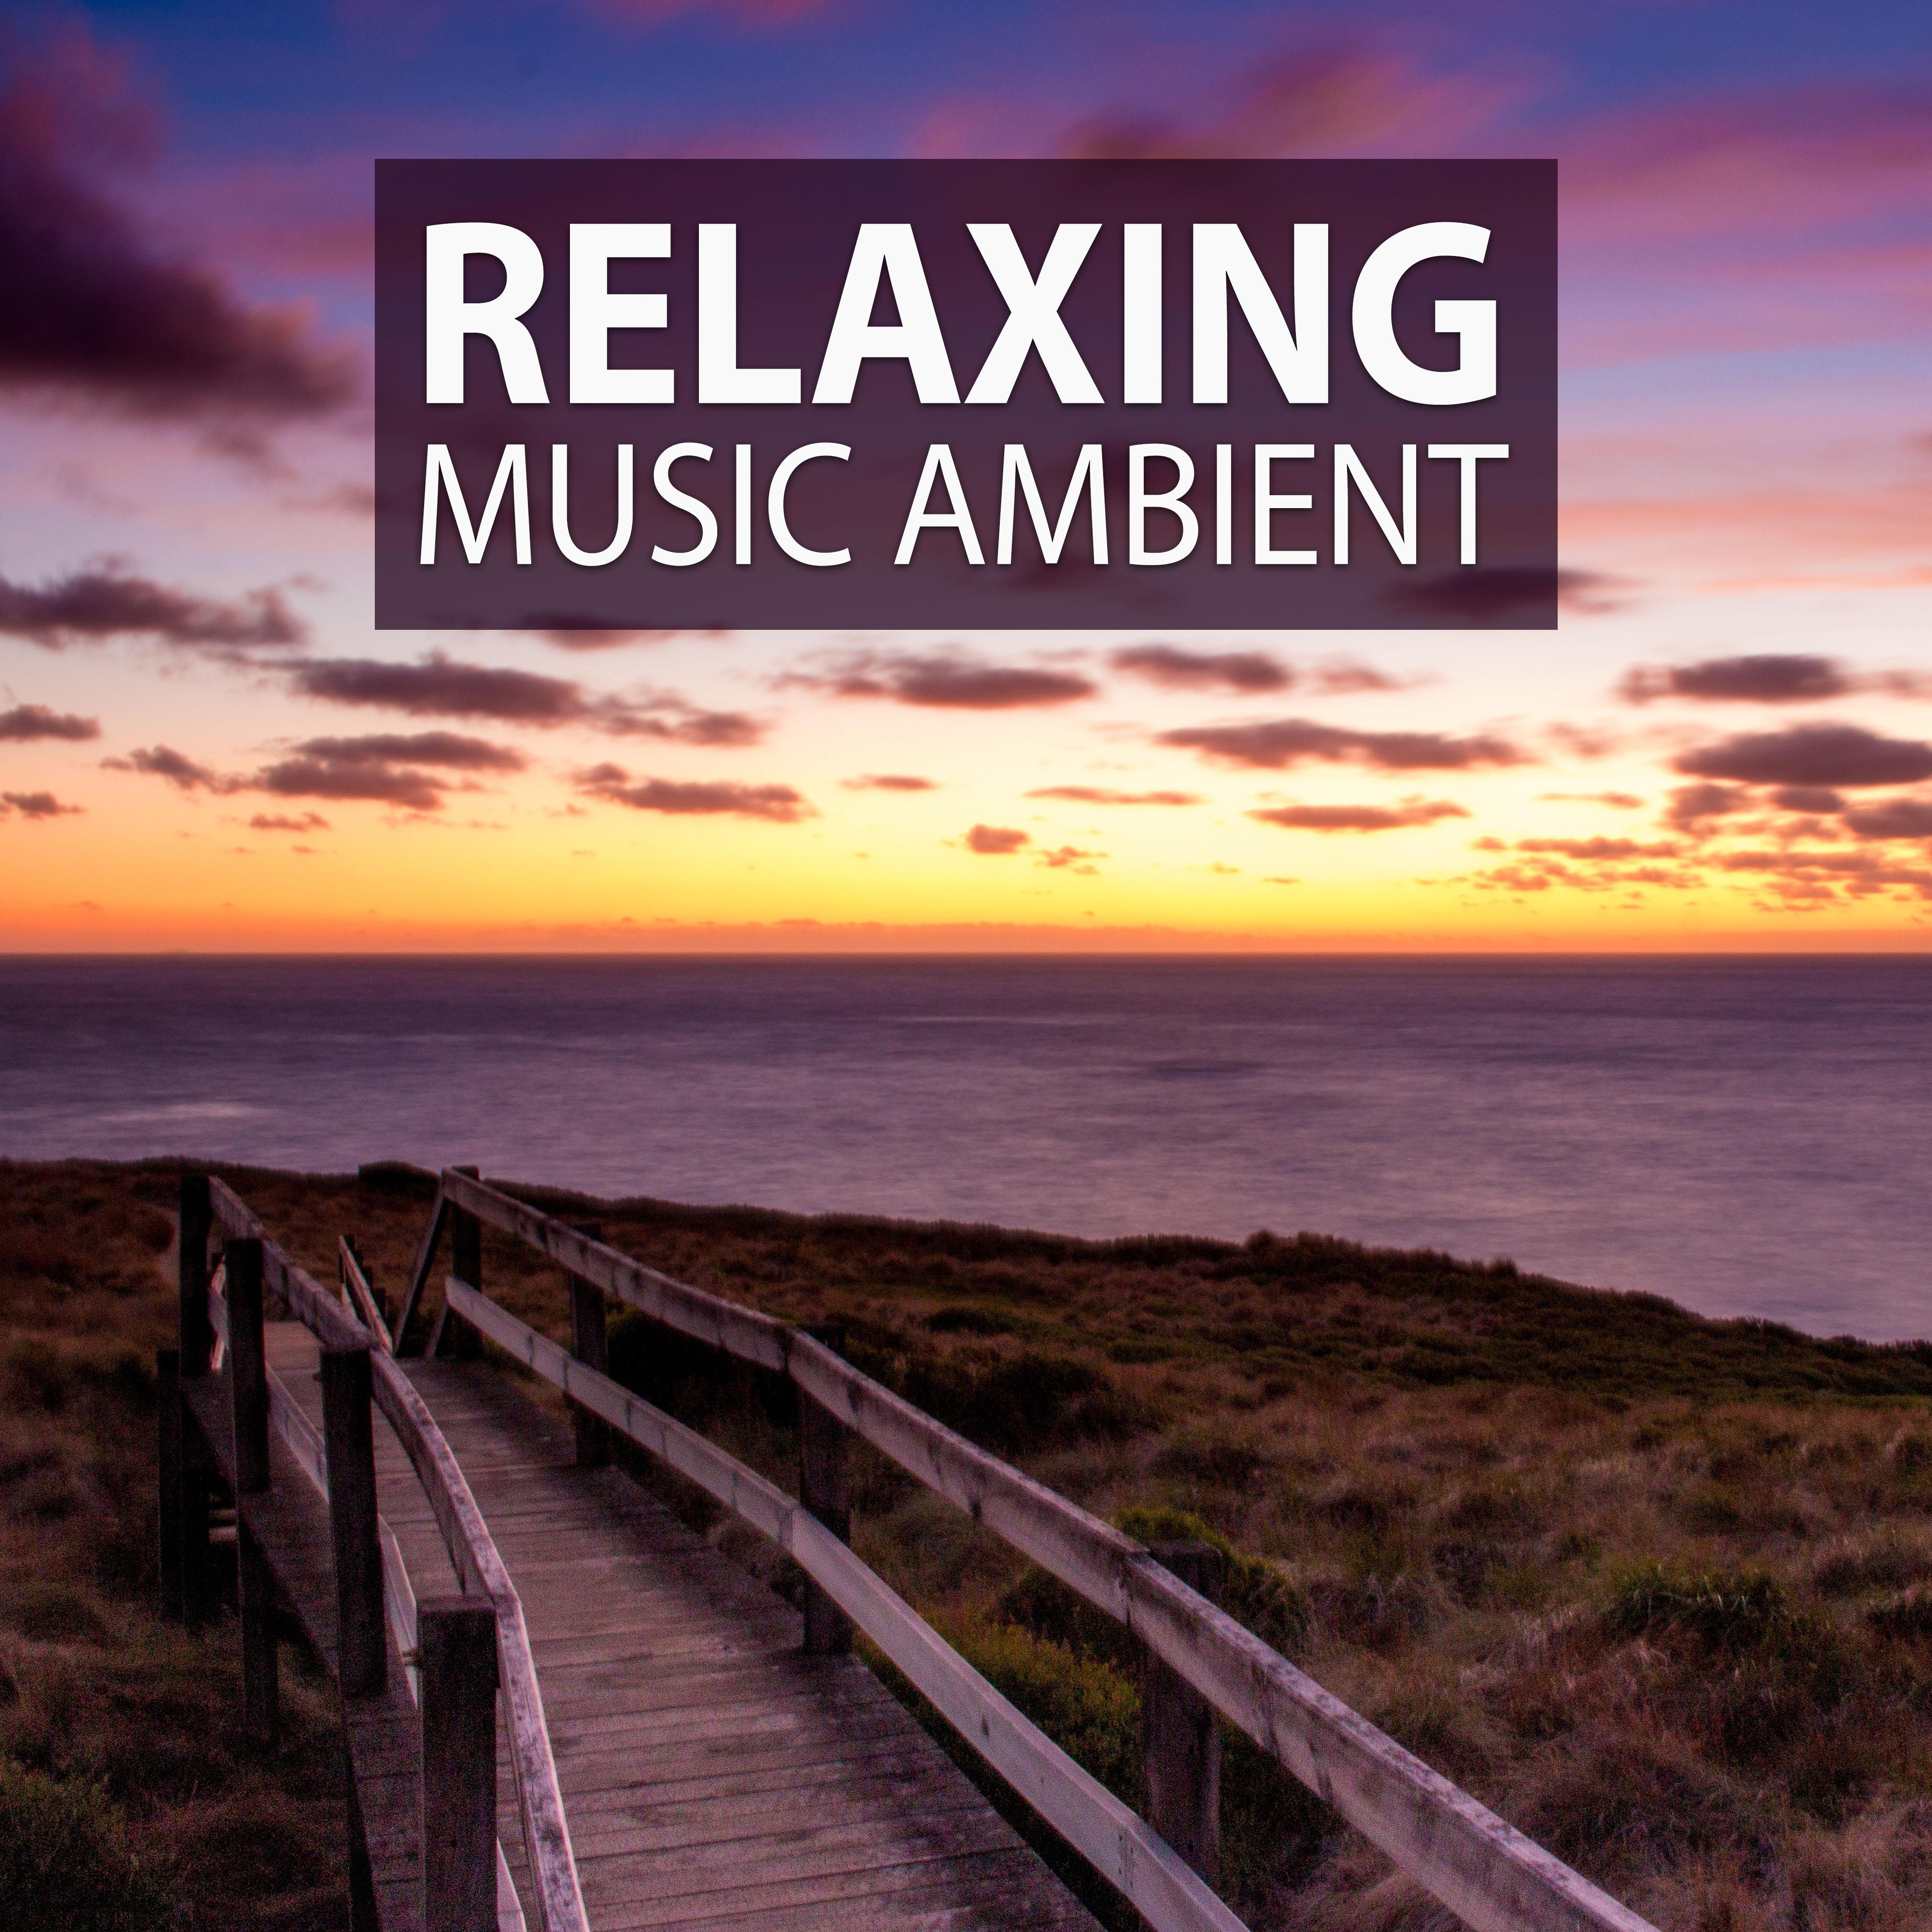 Relaxing Music Ambient - Relaxing Piano Music, Easy Going, Pain Relief, Lounge Relax, Relaxing Music to Calm Down